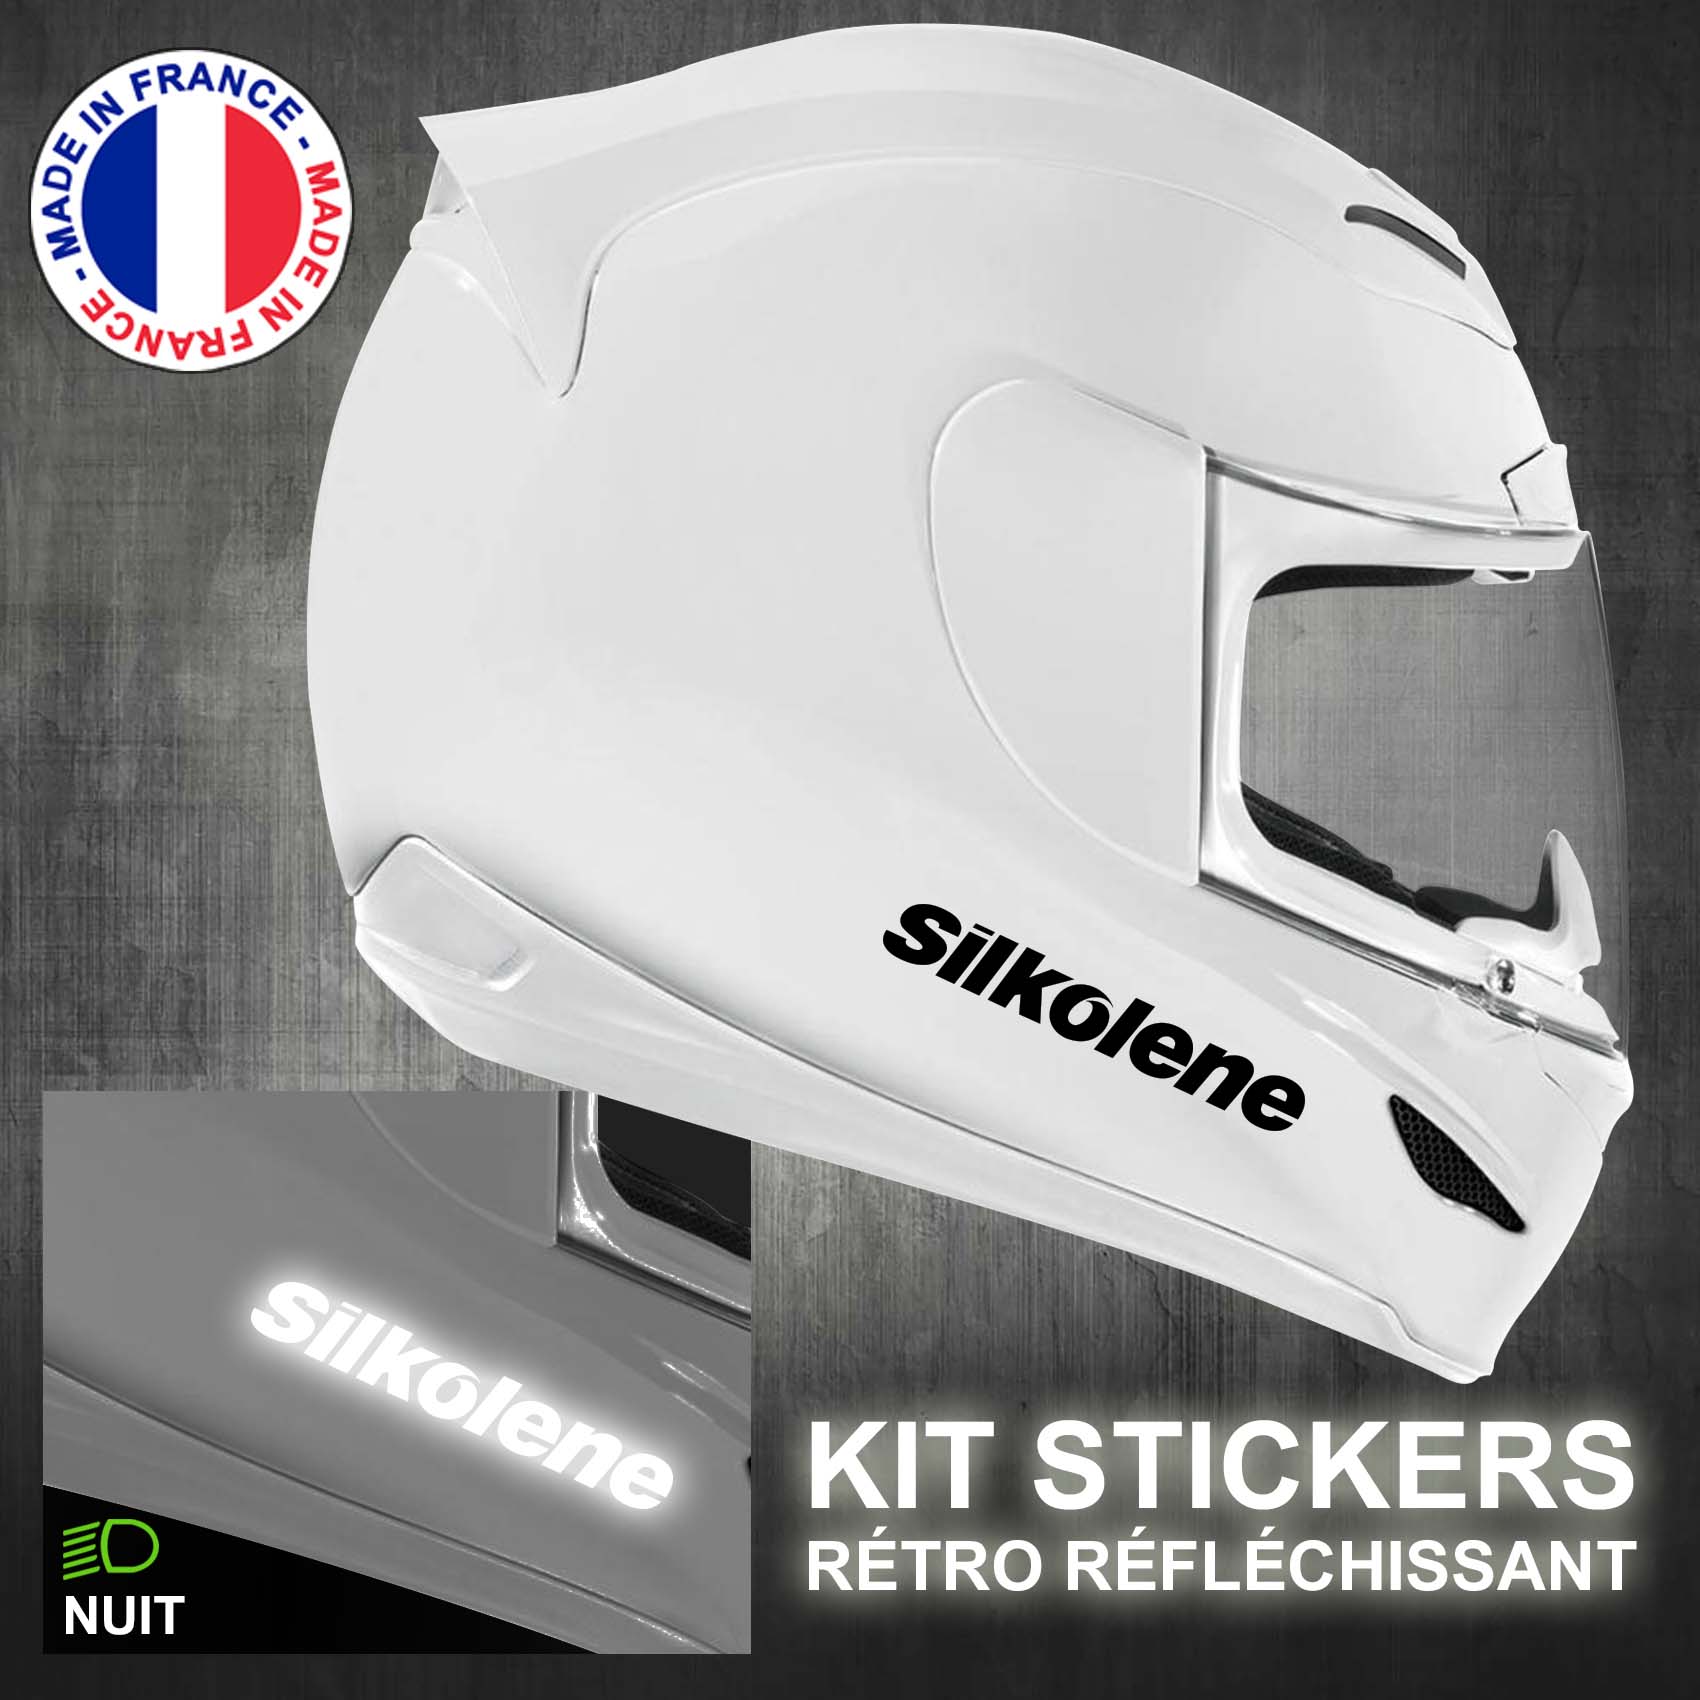 stickers-casque-moto-silkolene-ref1-retro-reflechissant-autocollant-moto-velo-tuning-racing-route-sticker-casques-adhesif-scooter-nuit-securite-decals-personnalise-personnalisable-min